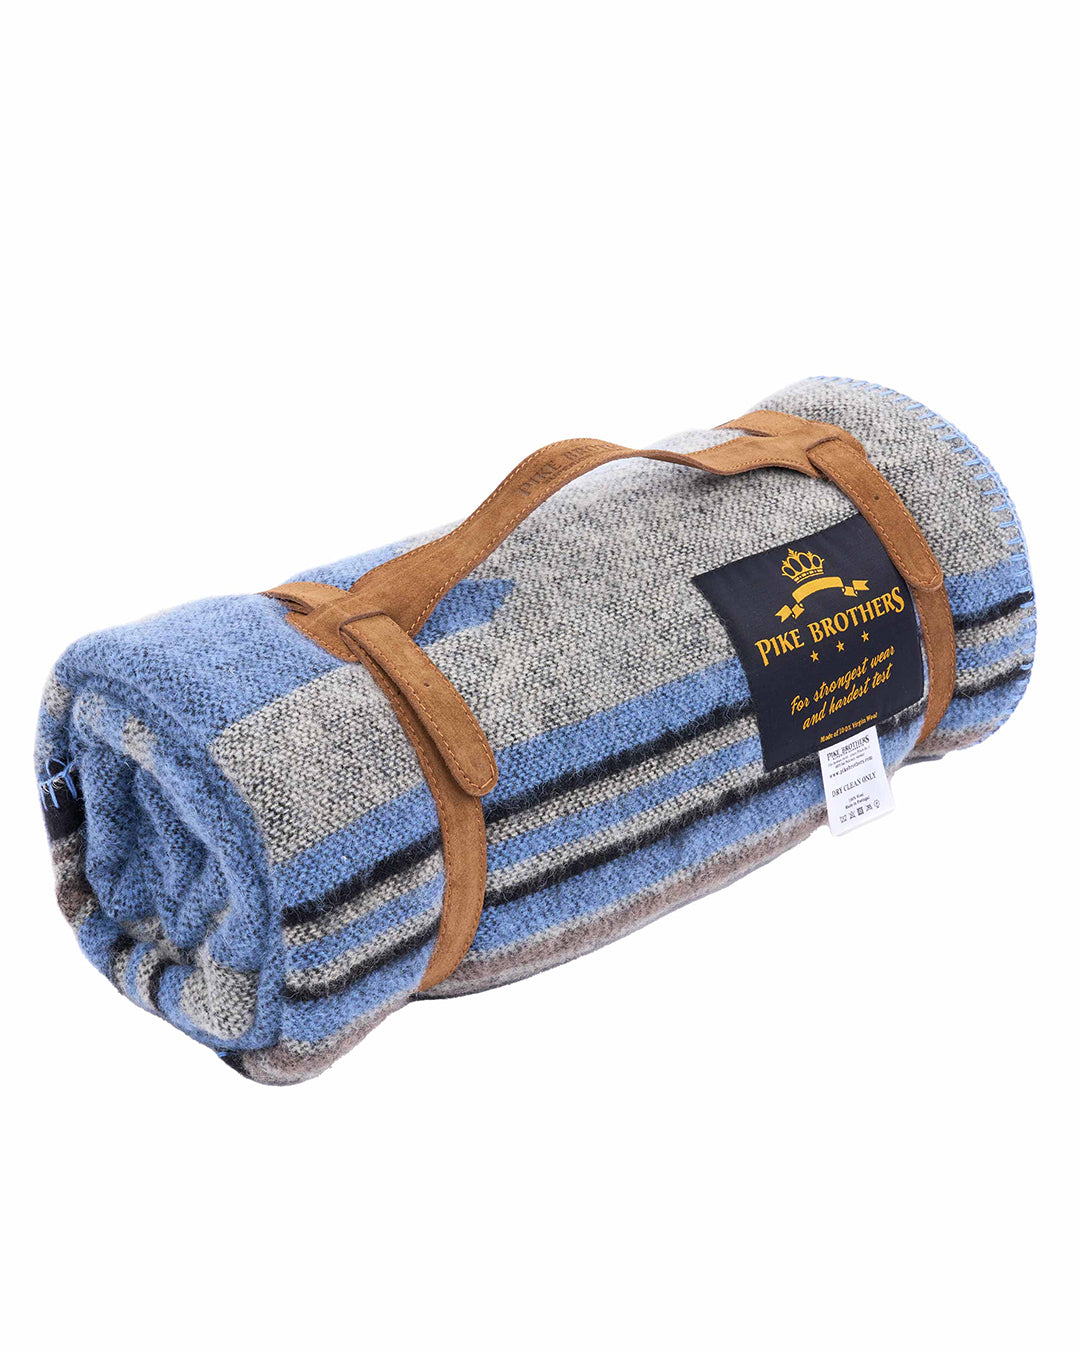 Pike Brothers 1969 Tolani Wool Blanket Blue